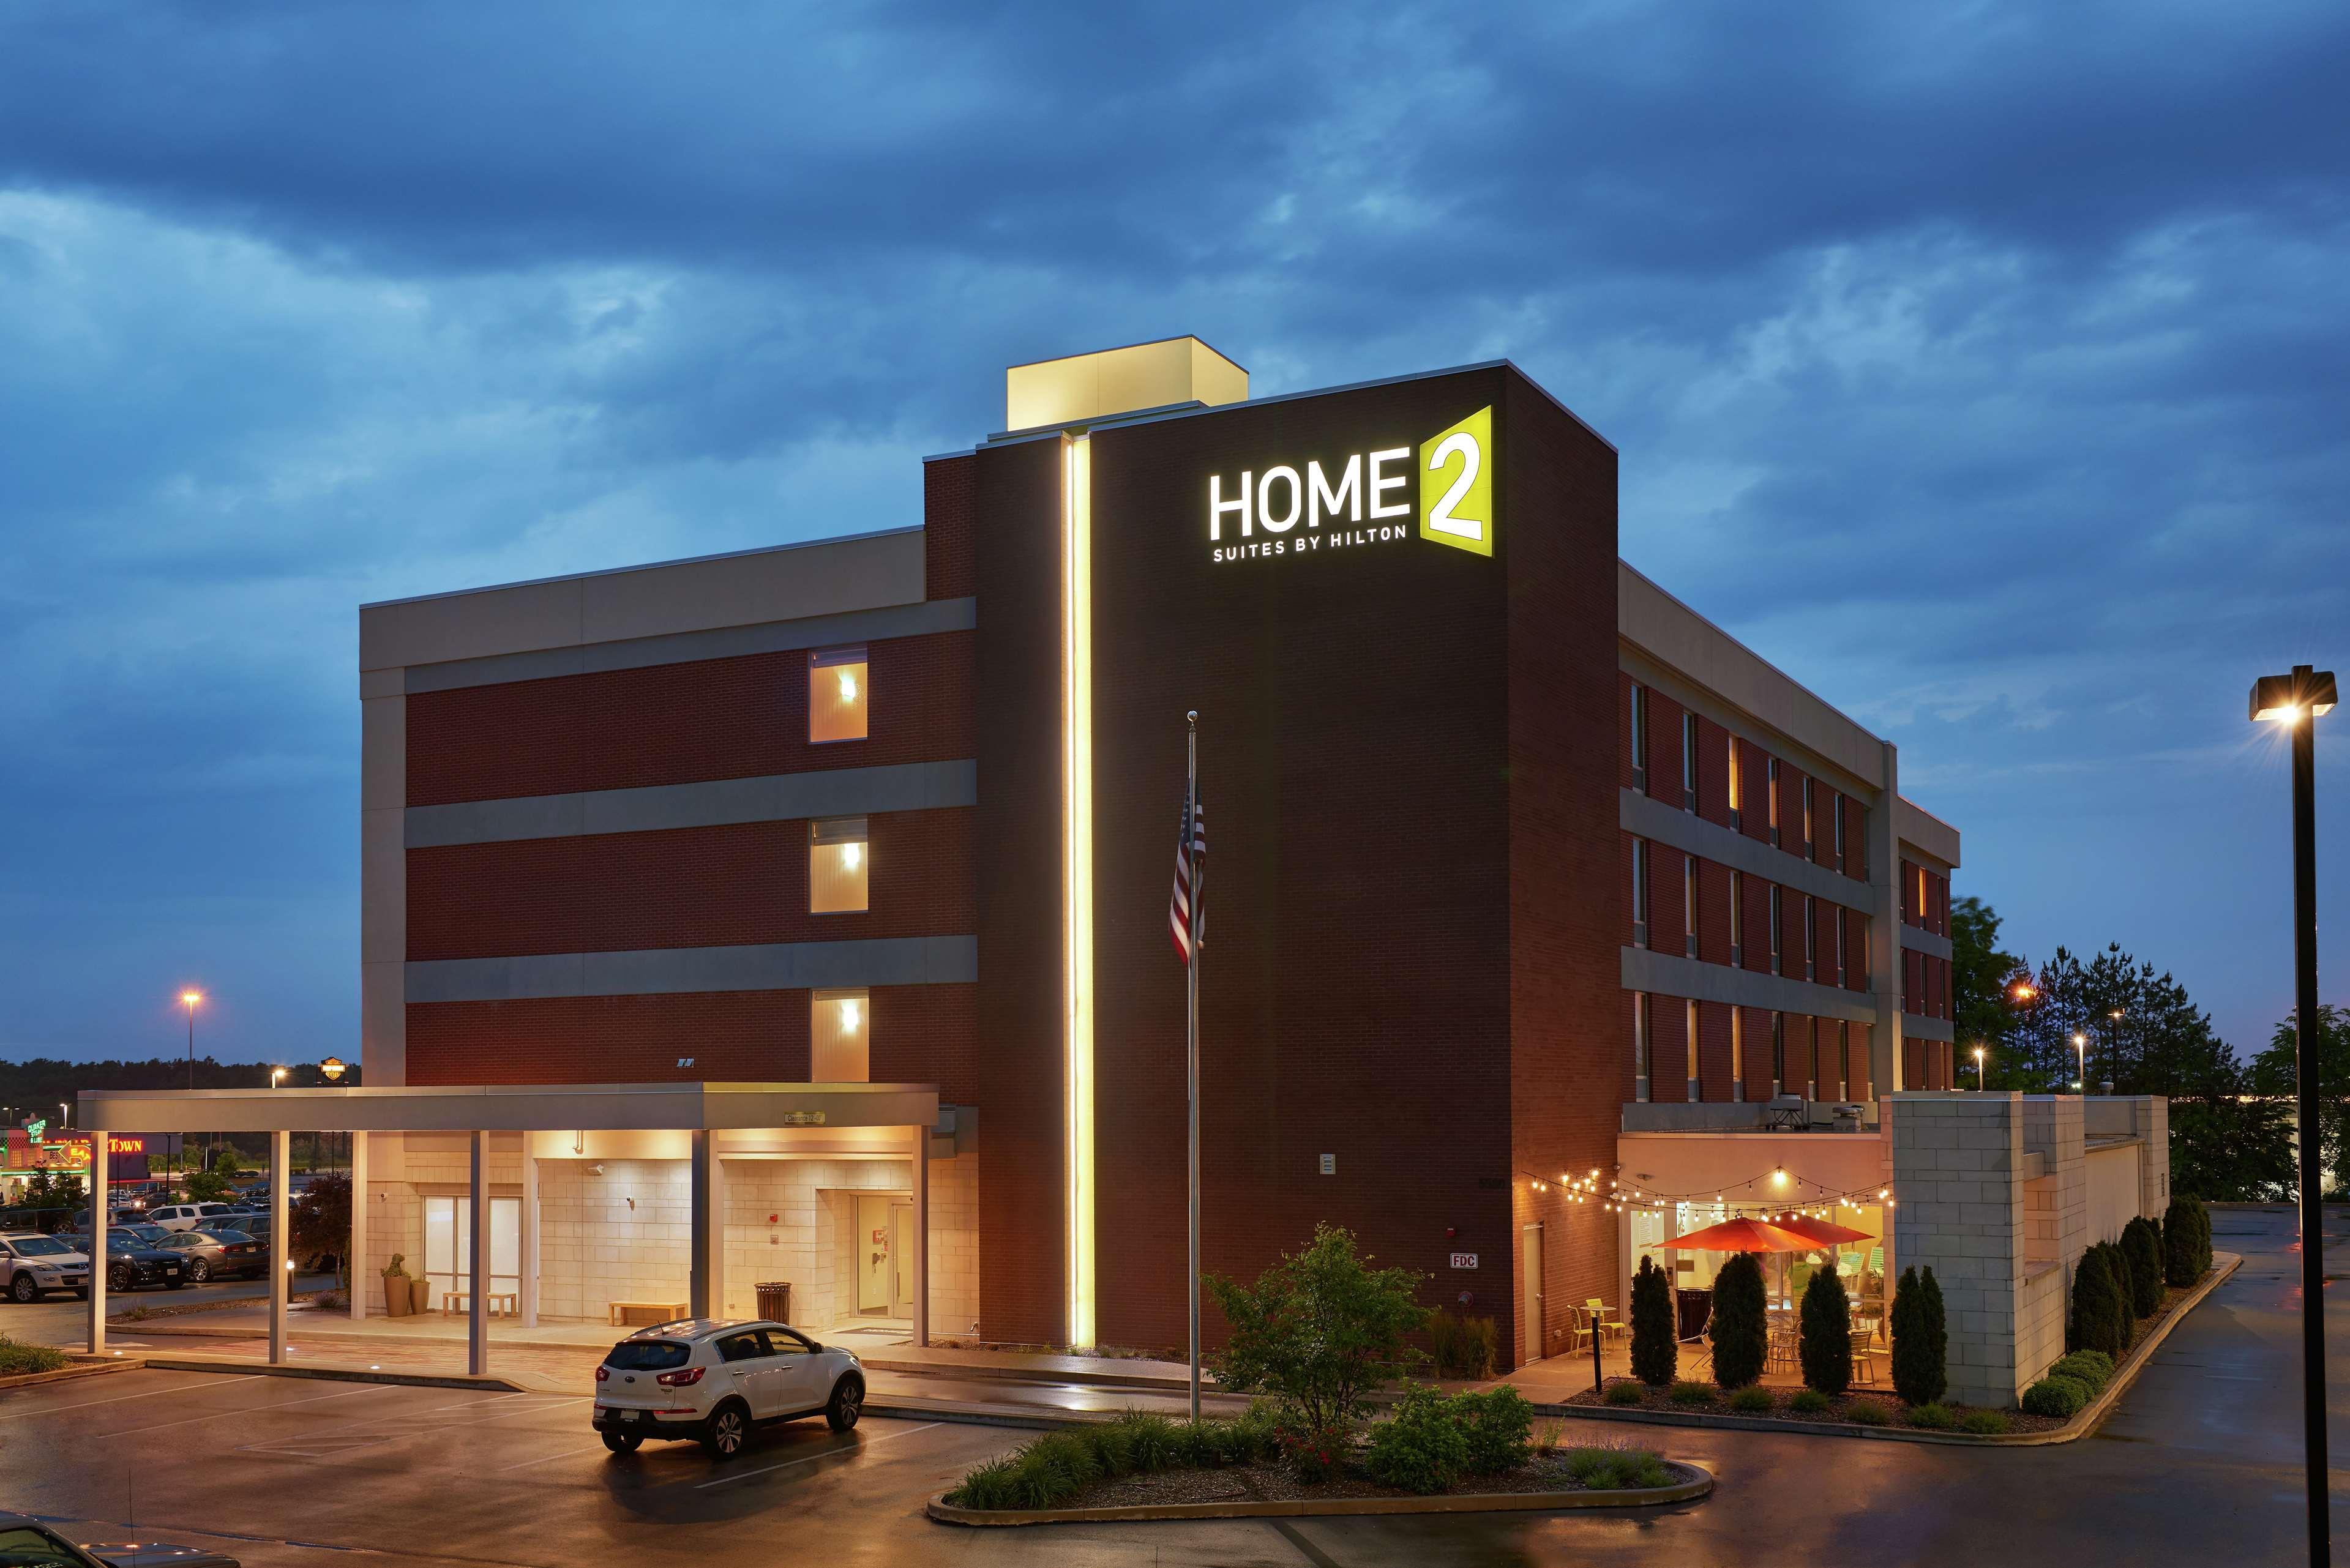 Home2 Suites By Hilton Youngstown Bagian luar foto